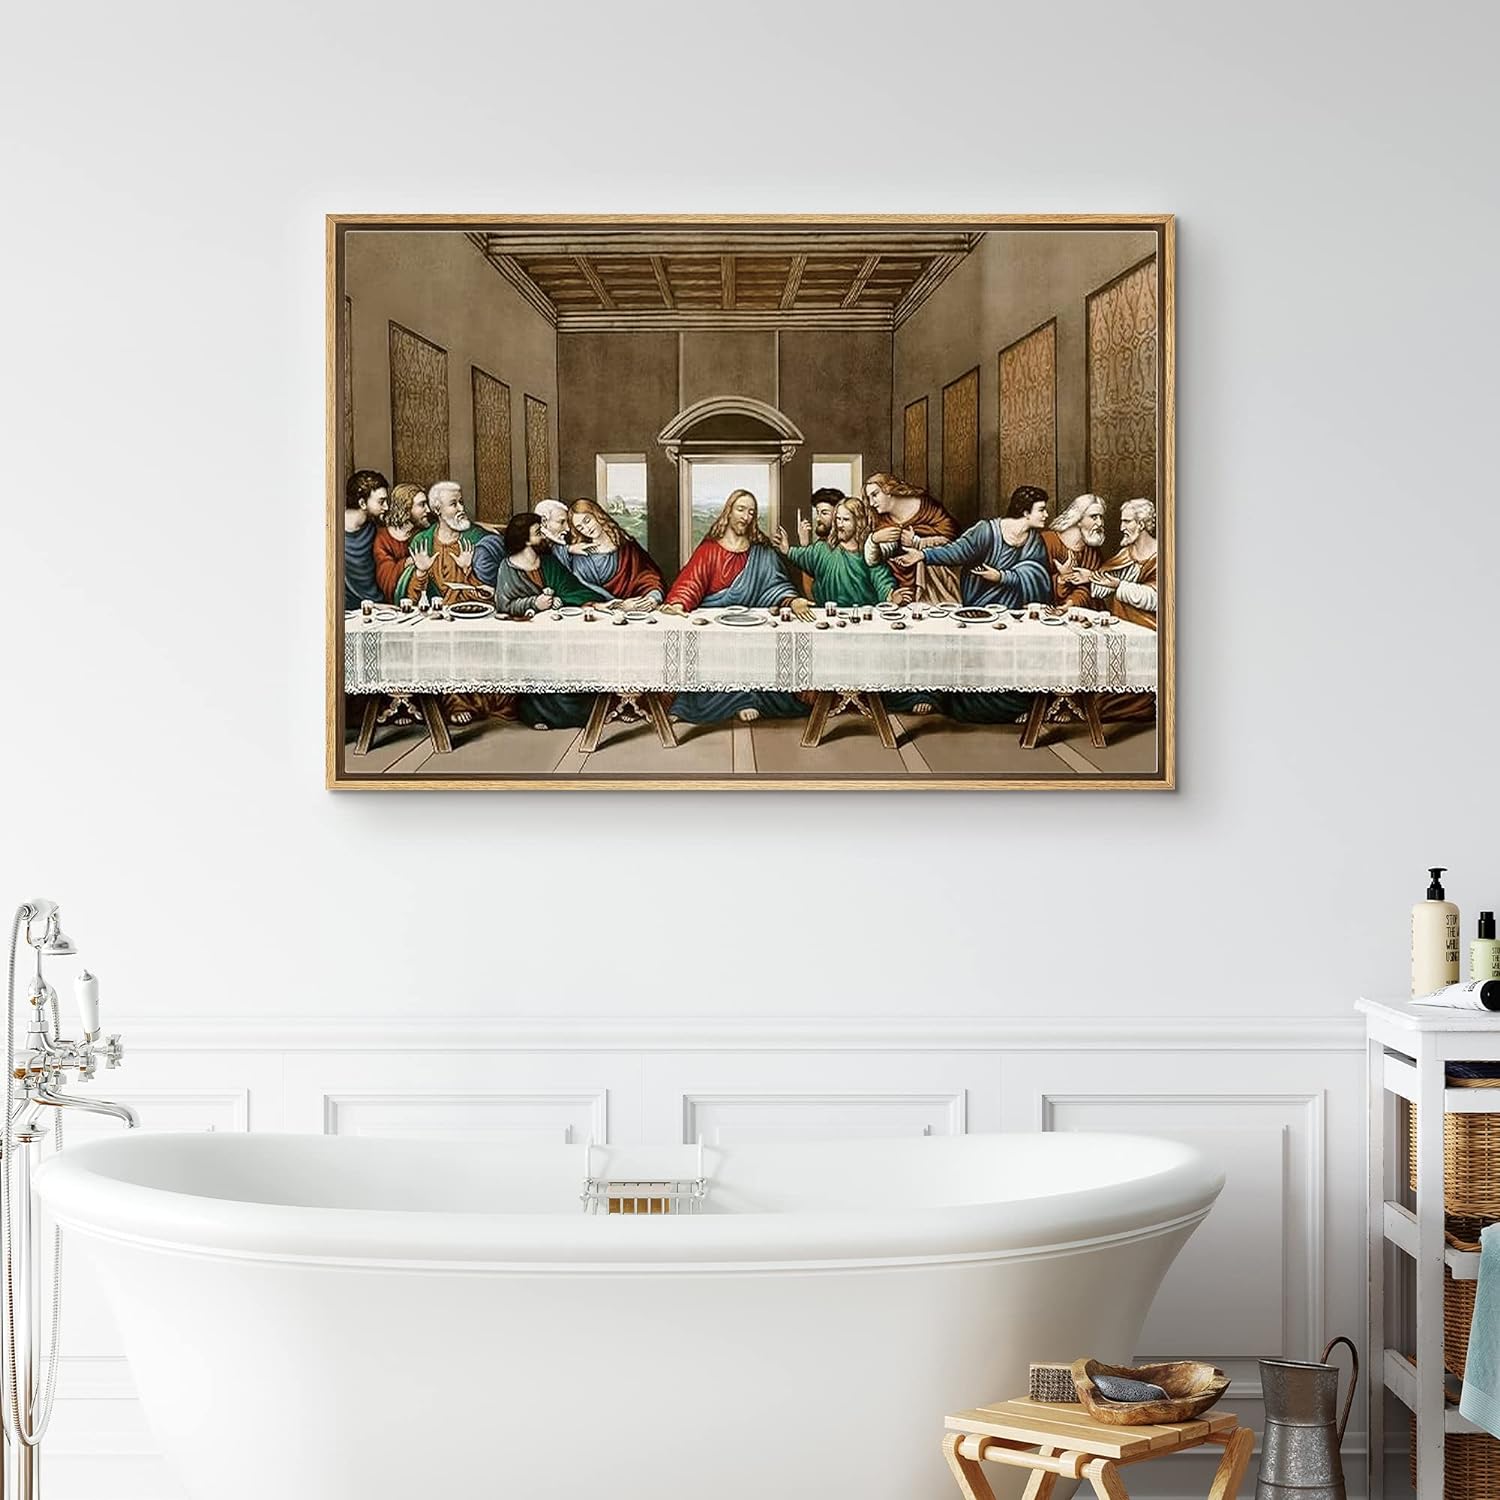 IDEA4WALL Framed Canvas Wall Art for Living Room, Bedroom La Ultima Cena Cuadro The Last Supper by Leonardo Da Vinci Canvas Prints for Home Decoration Ready to Hanging - image 4 of 5